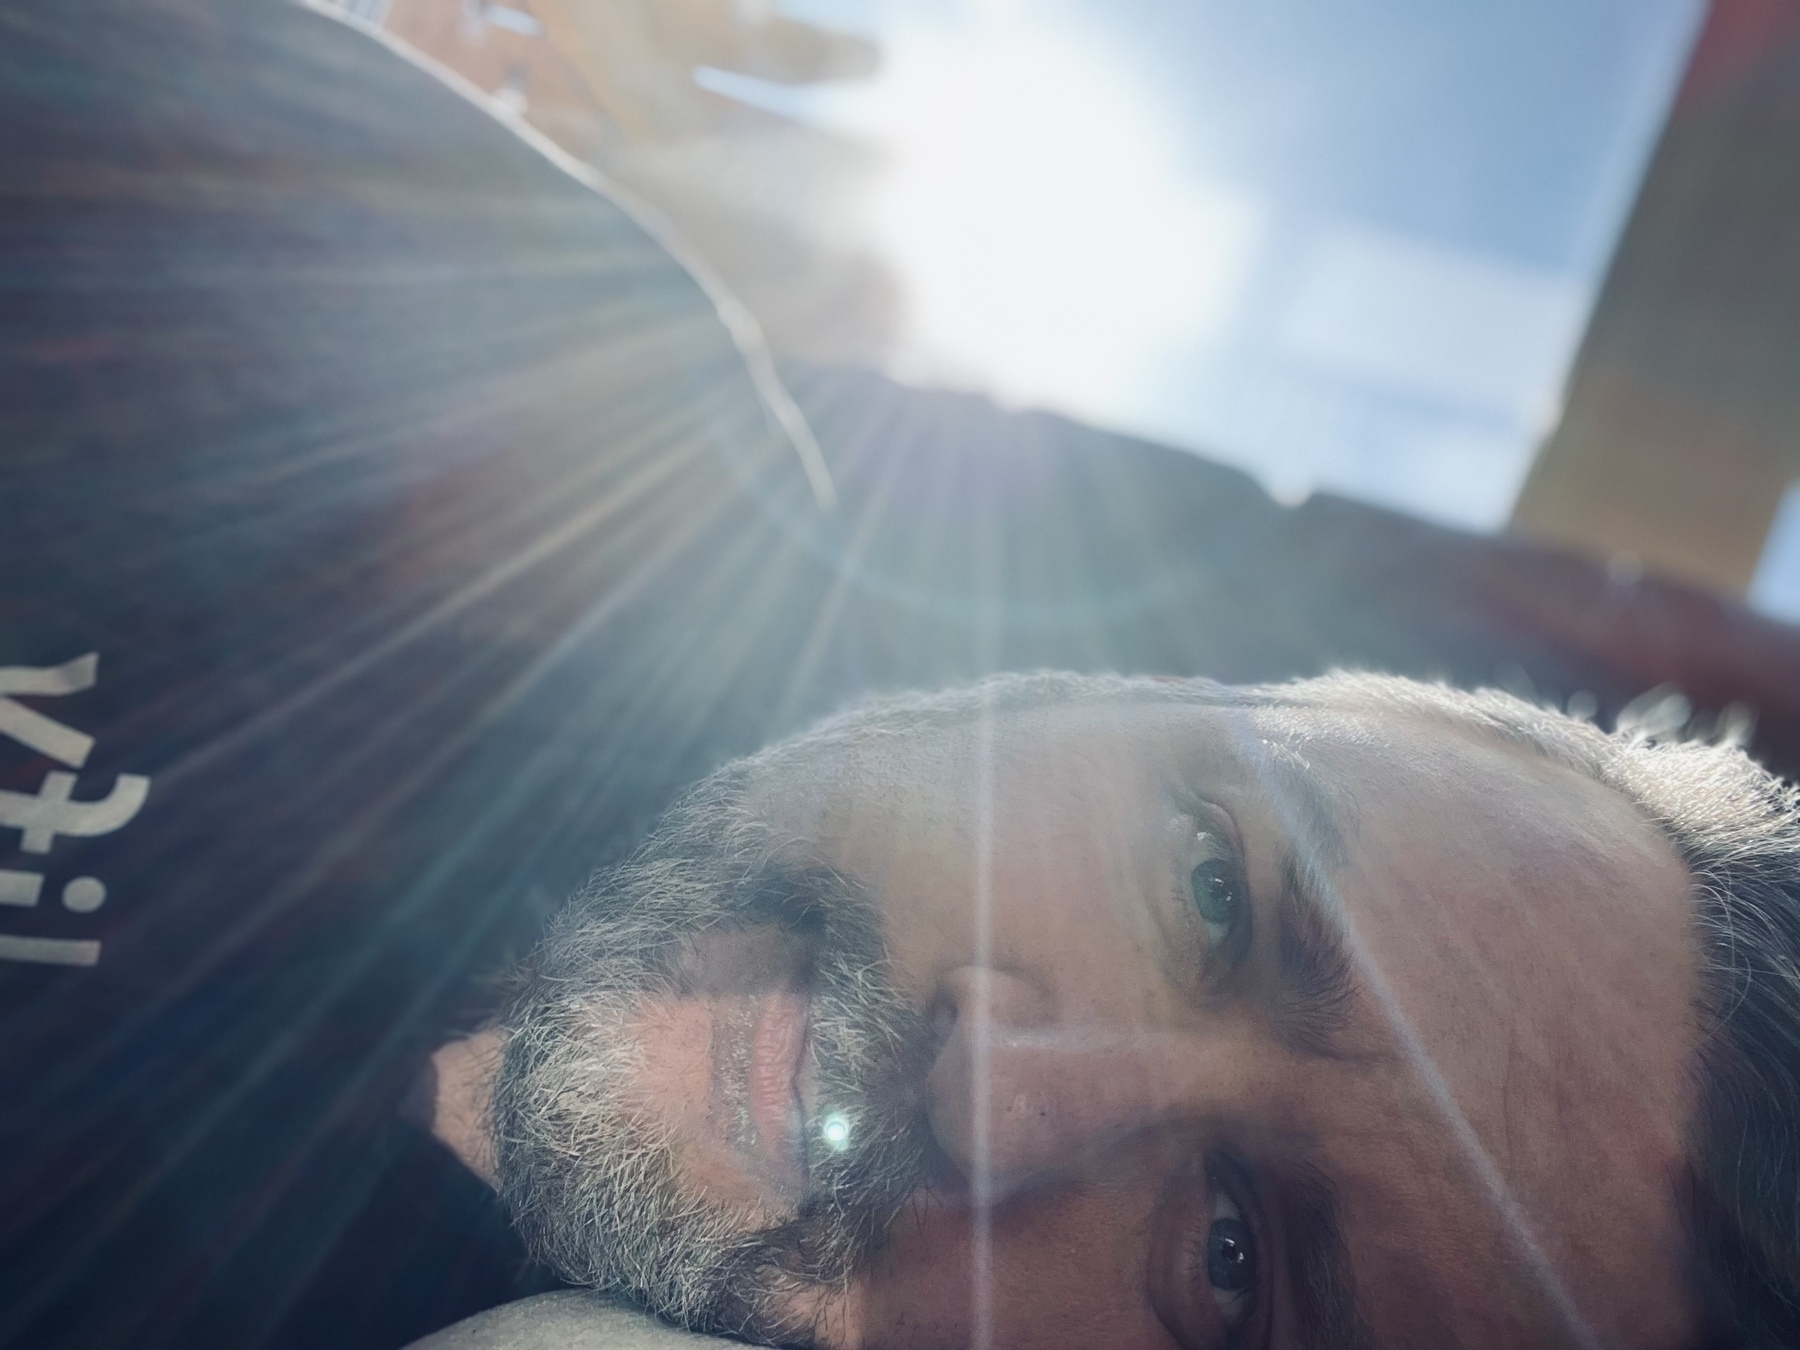 Me laying sideways with a sun flare over my head